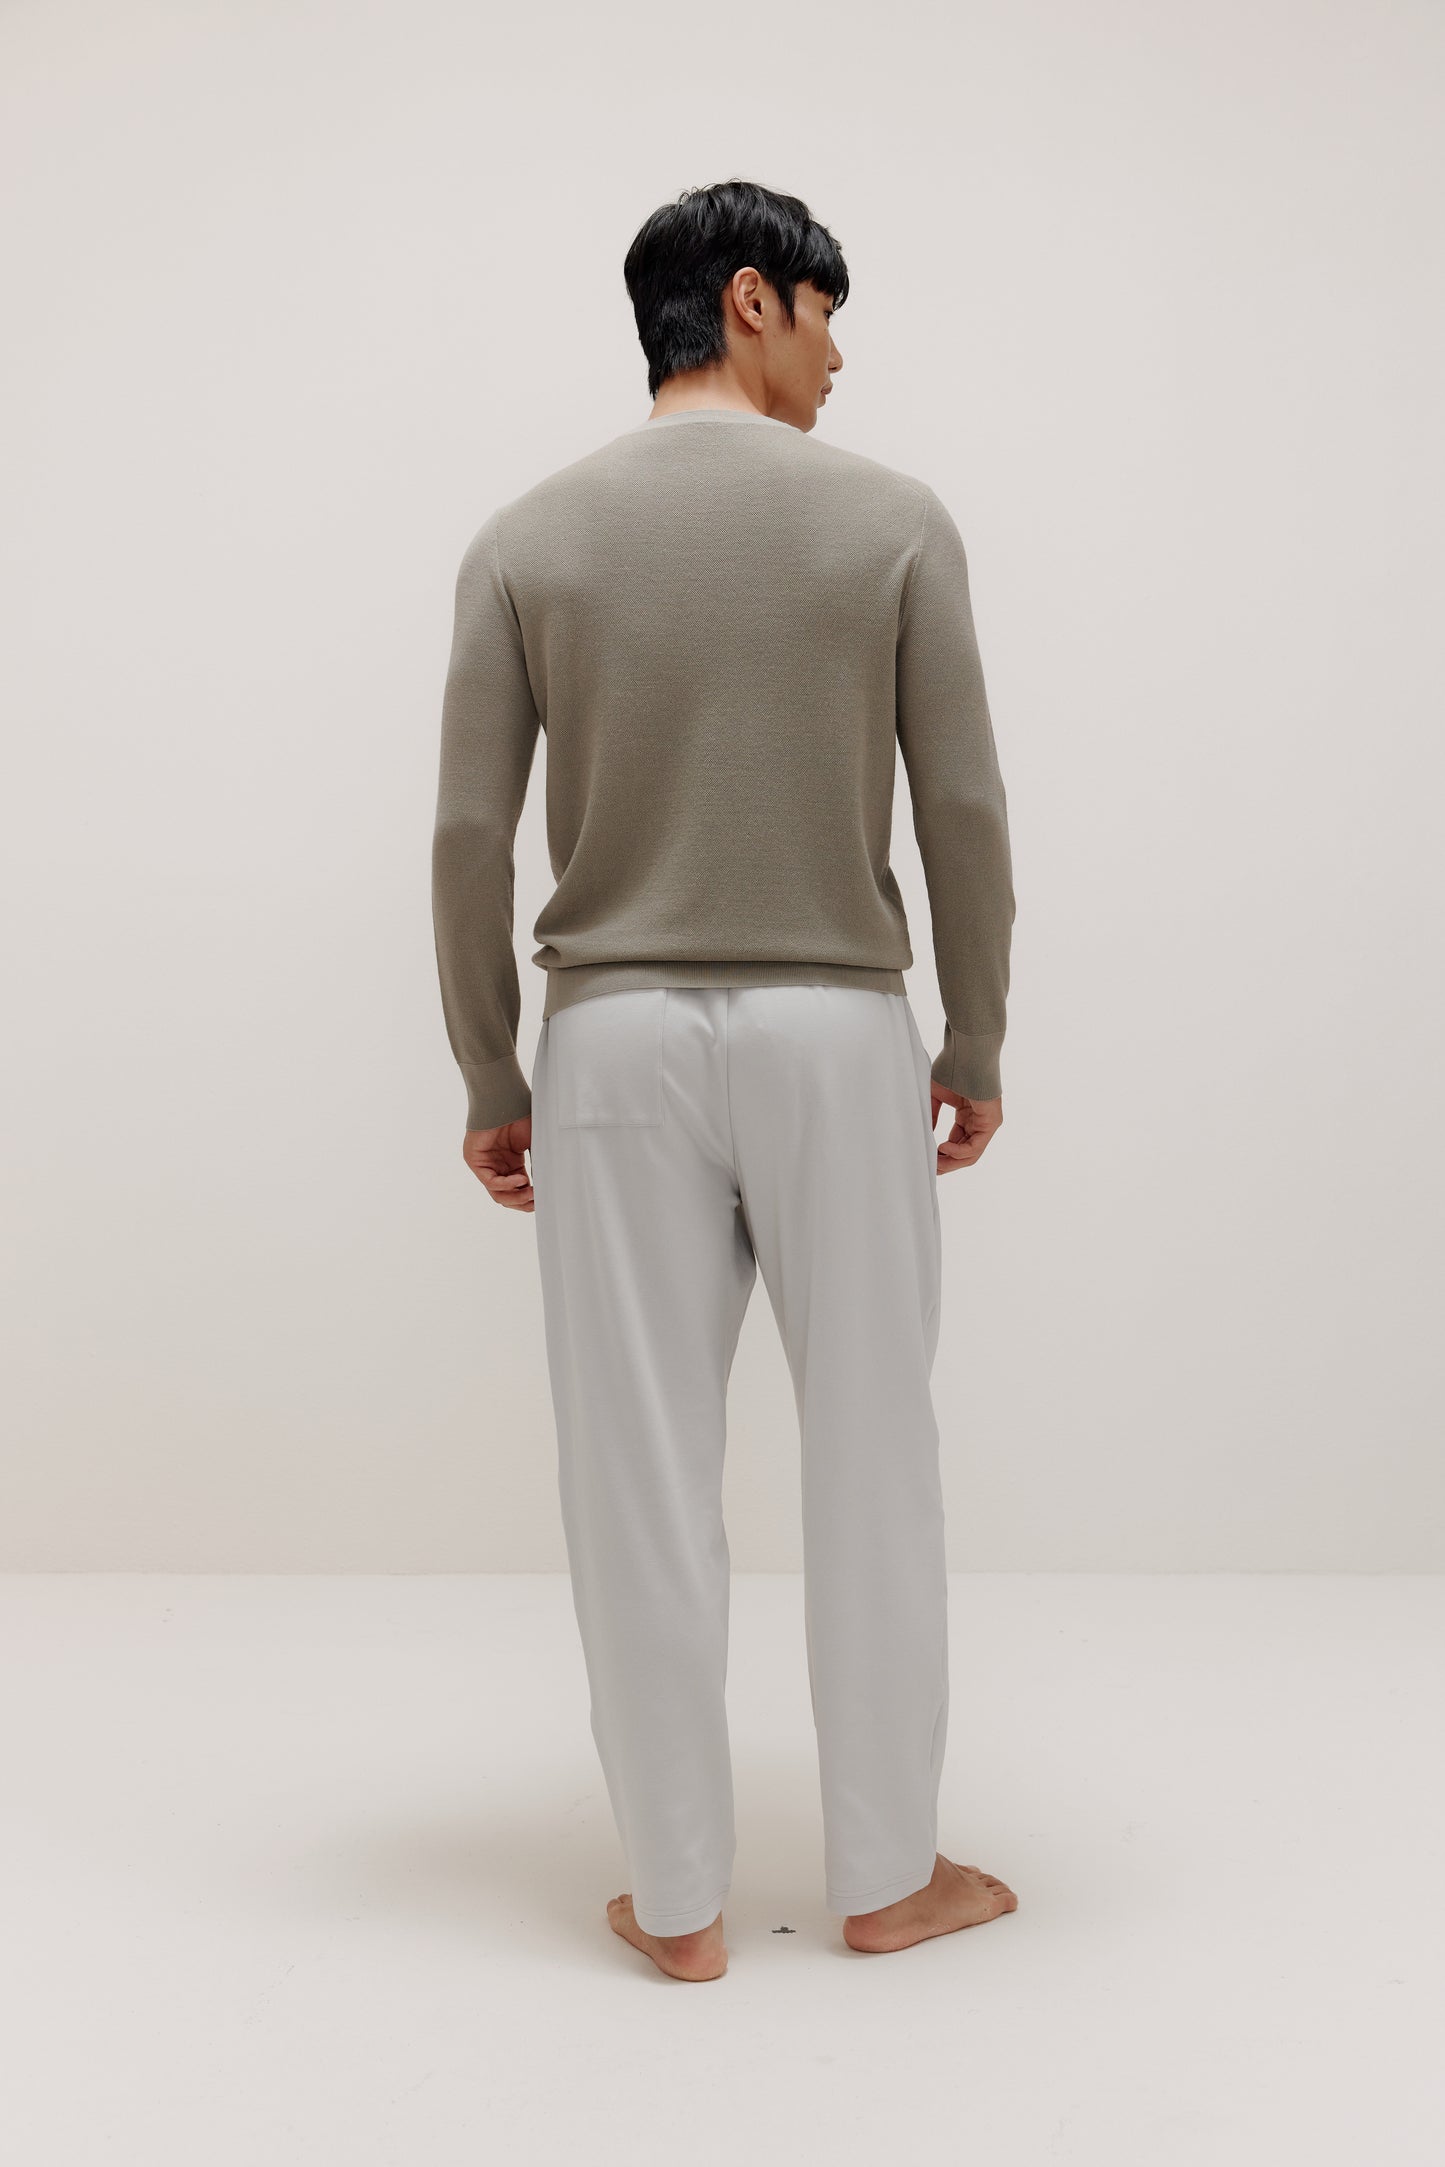 back of man in khaki sweater and grey pants